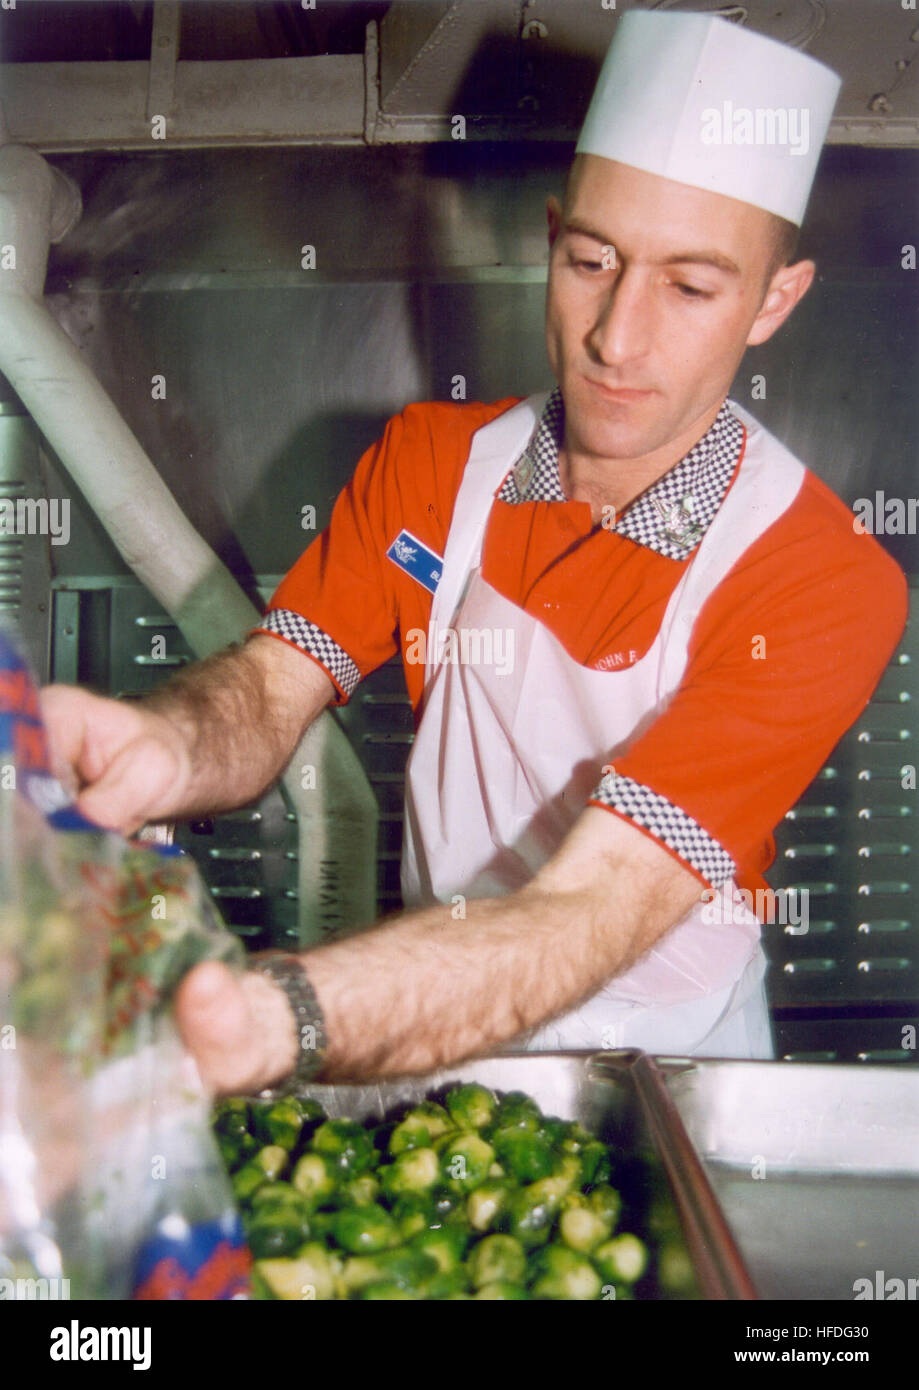 020213-N-7741S-004 At sea aboard USS John F. Kennedy (CV 67) Feb. 13, 2002 -- Mess Specialist 2nd Class Russell Burns from Calhoun City, Miss., prepares vegetables for midnight rations ÒMid-RatsÓ for crewmembers assigned to late night duties aboard ship.  John F. Kennedy and her embarked Carrier Air Wing (CVW) recently departed on a scheduled deployment, and will relieve USS Theodore Roosevelt (CVN 71) to conduct missions in support of Operation Enduring Freedom.  U.S. Navy photo by PhotographerÕs Mate Airman David Smith (RELEASED) US Navy 020213-N-7741S-004 Midnight food preparation aboard JF Stock Photo